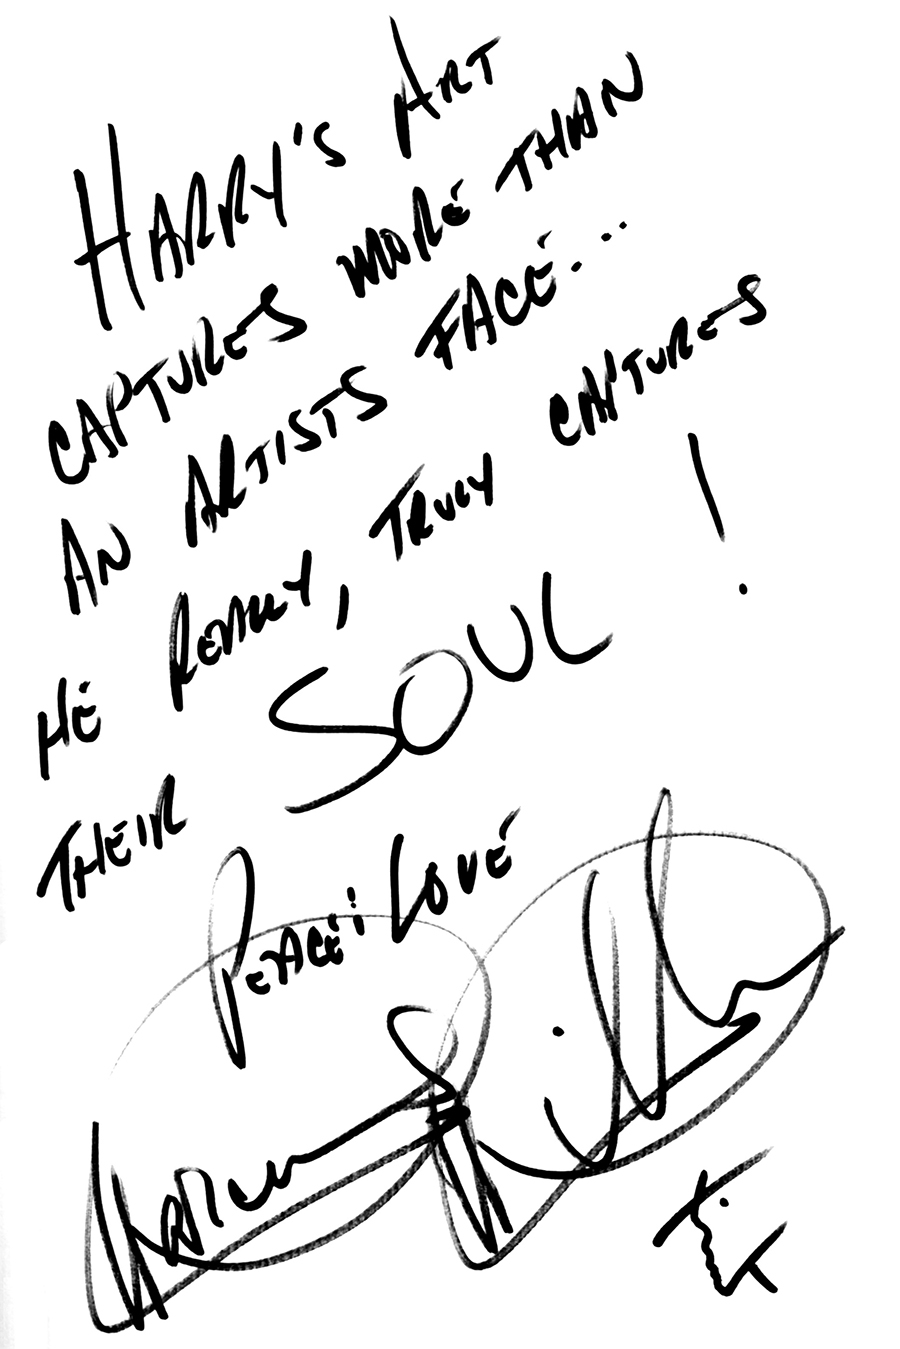 signed Statement by Marcus Miller about Harald Zickhardt's paintings